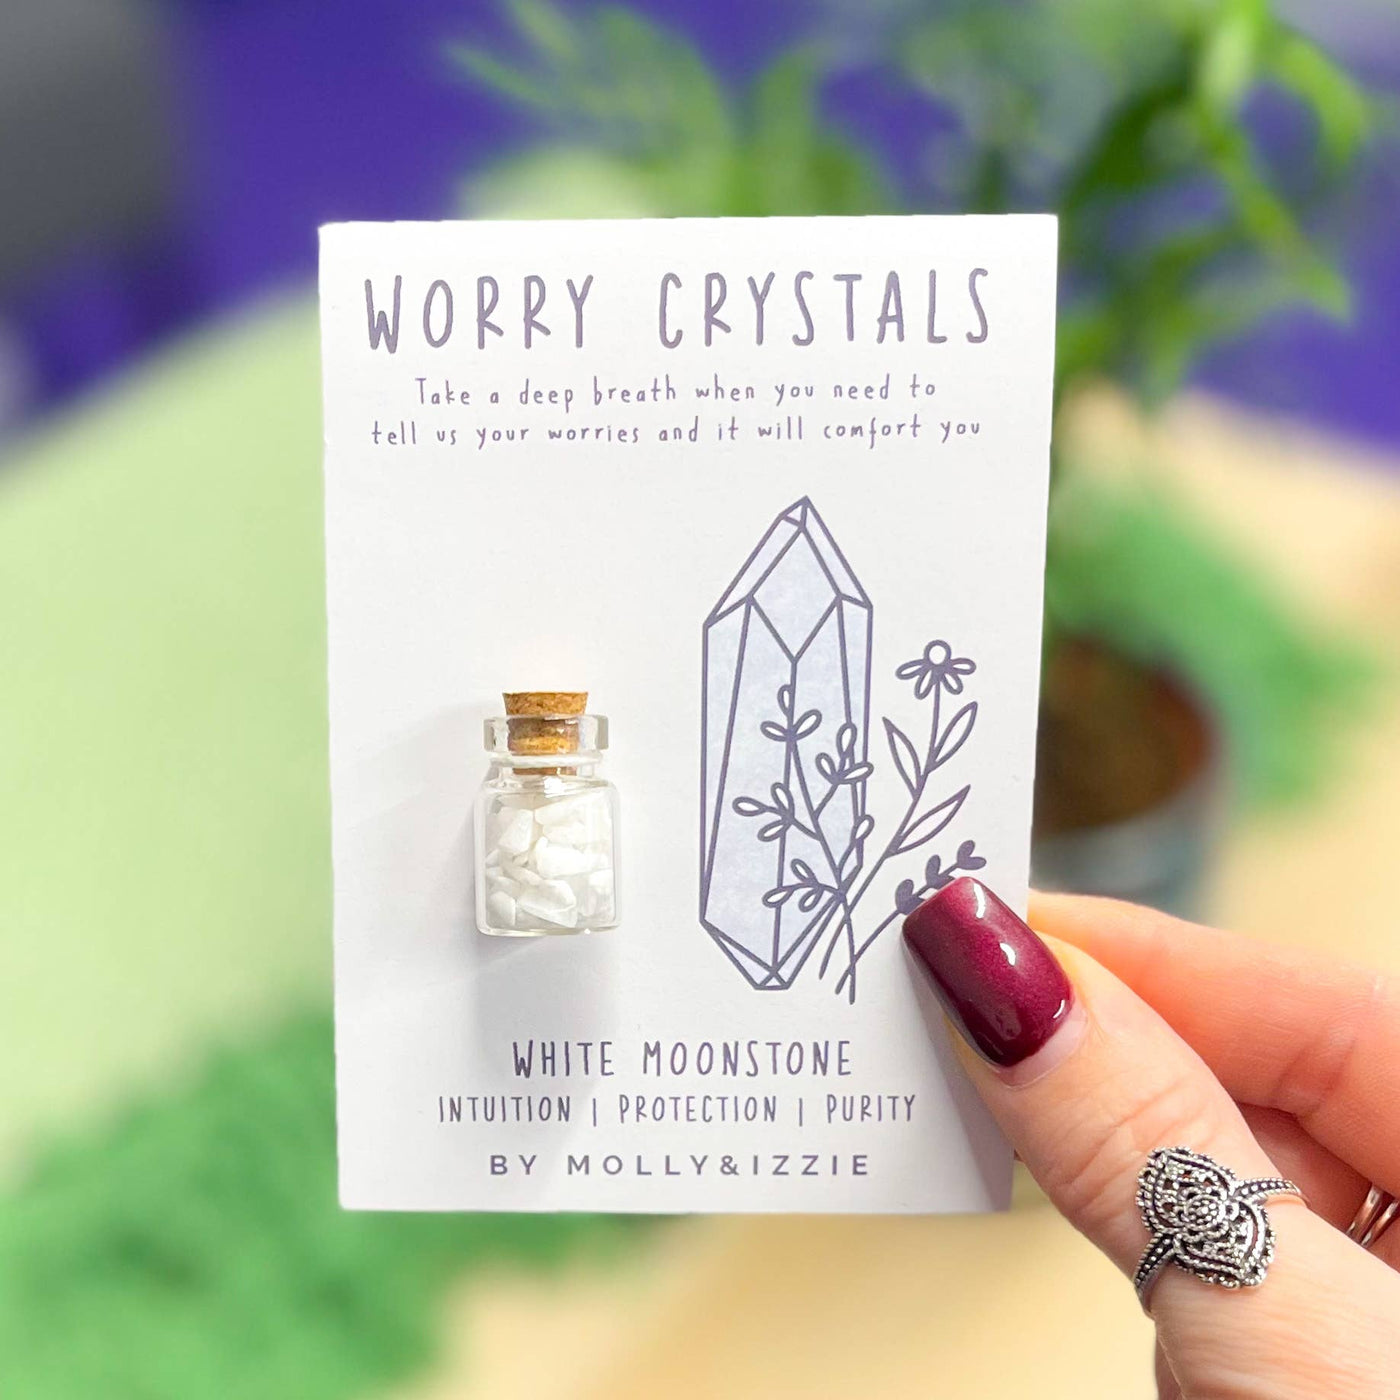 White Moonstone Worry Crystals on Card